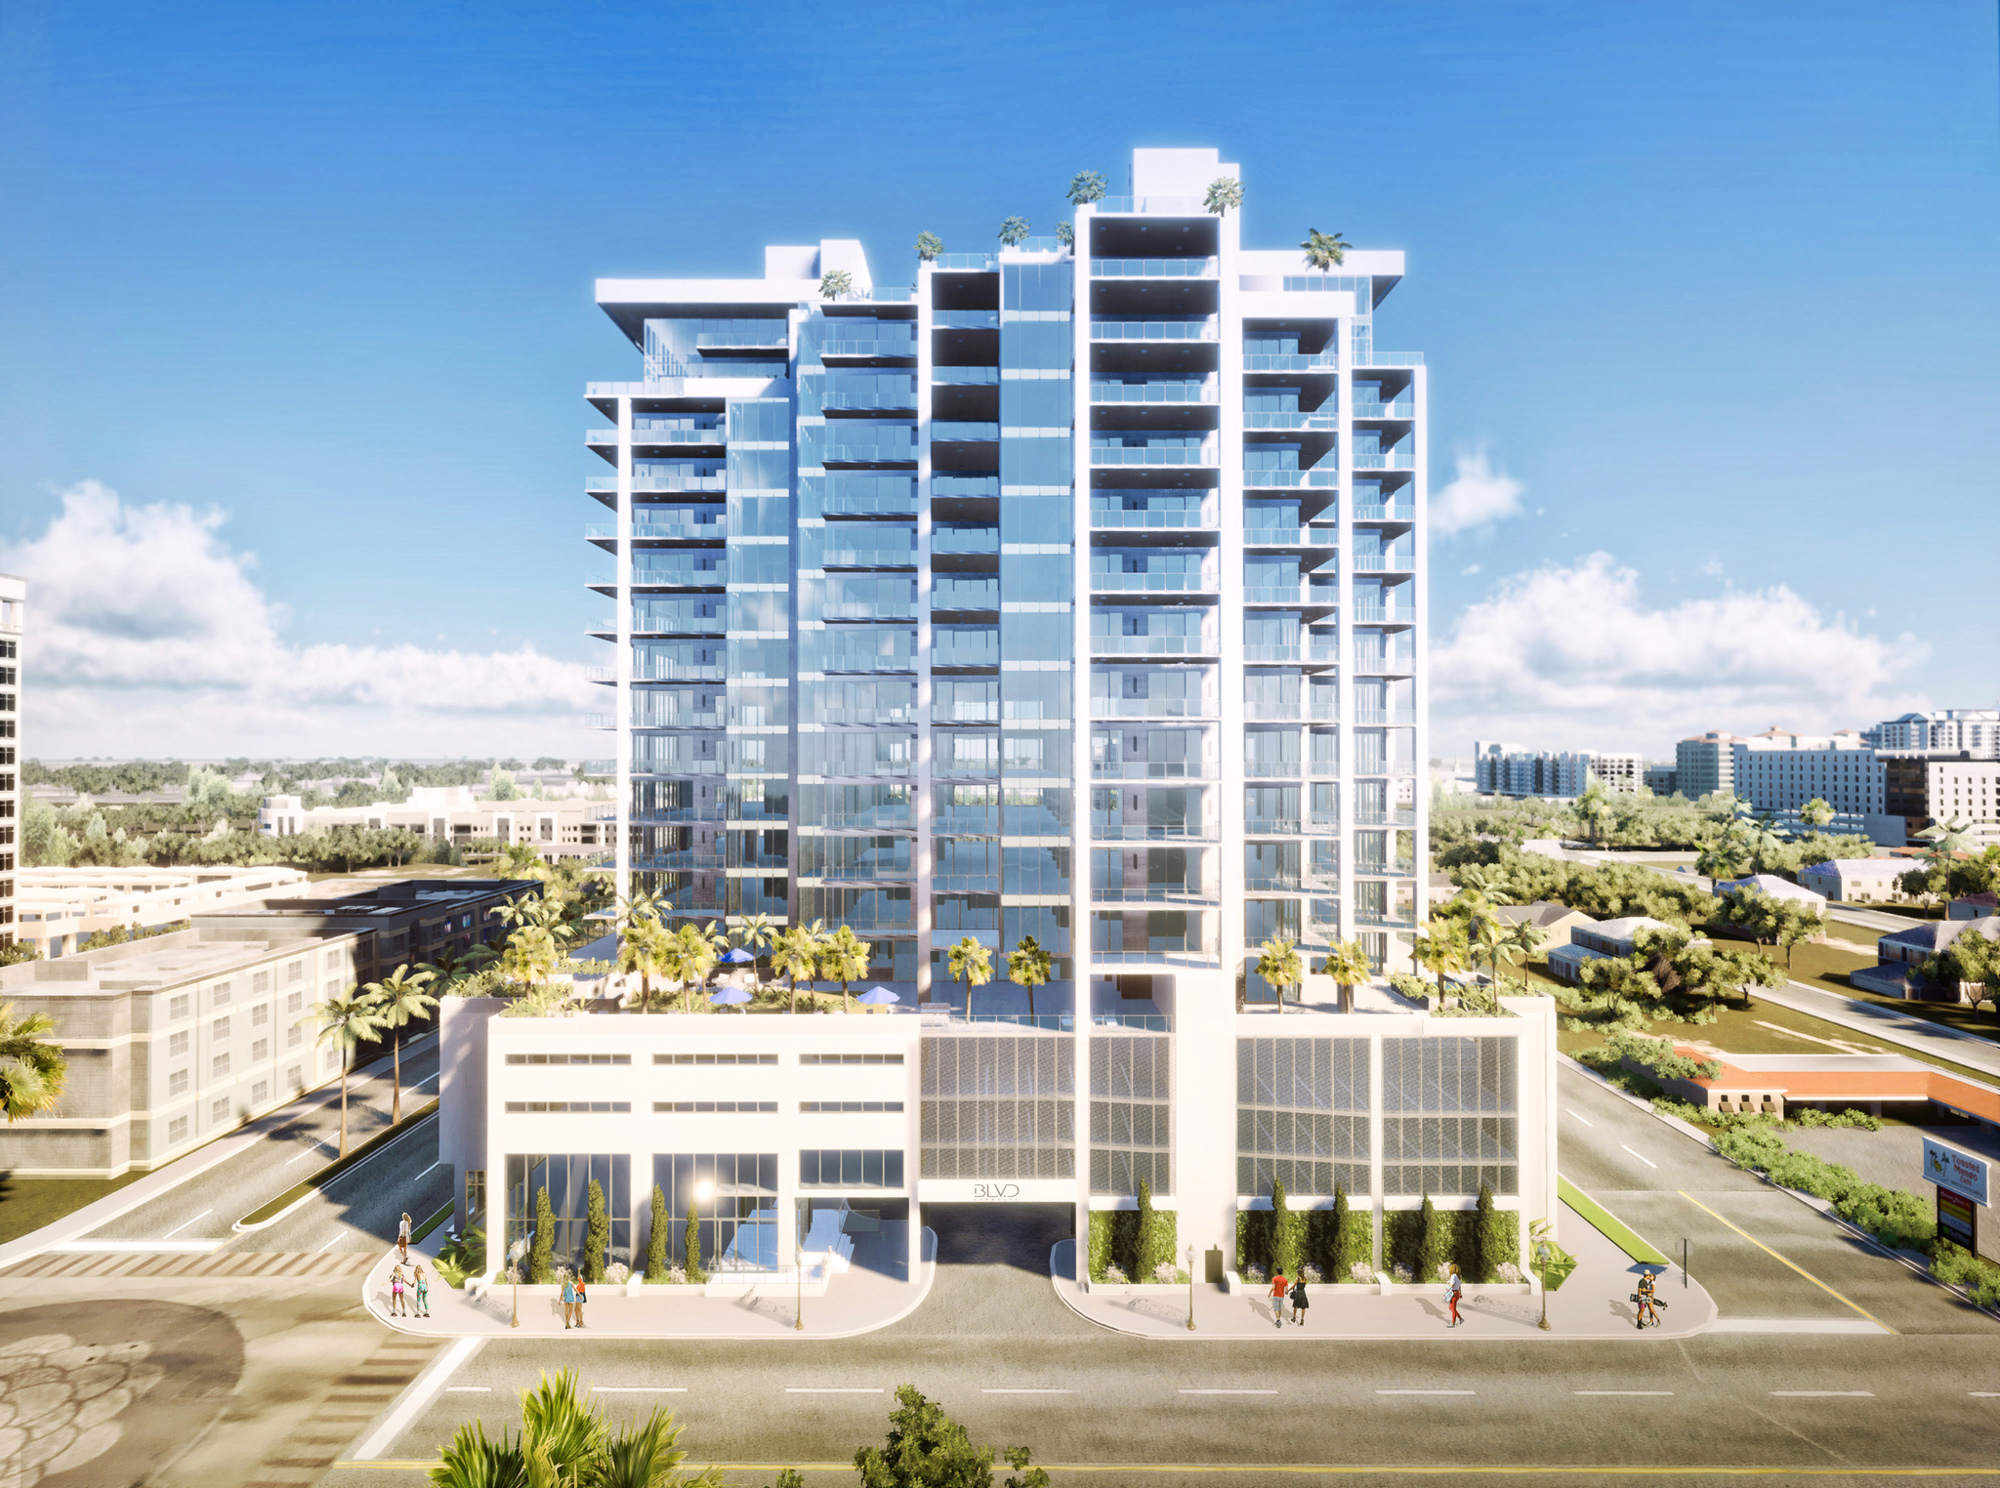 Core Development Inc.'s planned BLVD condo tower will contain 49 upscale residences. To date, 24 have been pre sold.